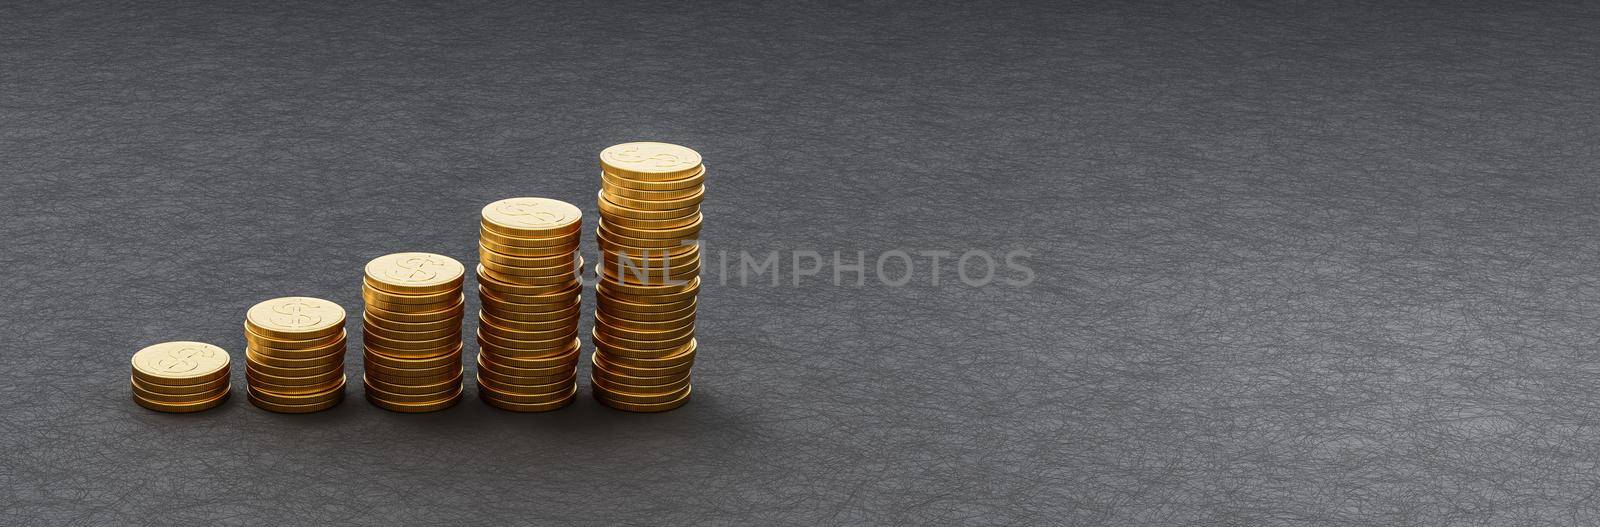 Rising Heaps of Golden Coins on Dark Background with Copy Space 3D Render Illustration